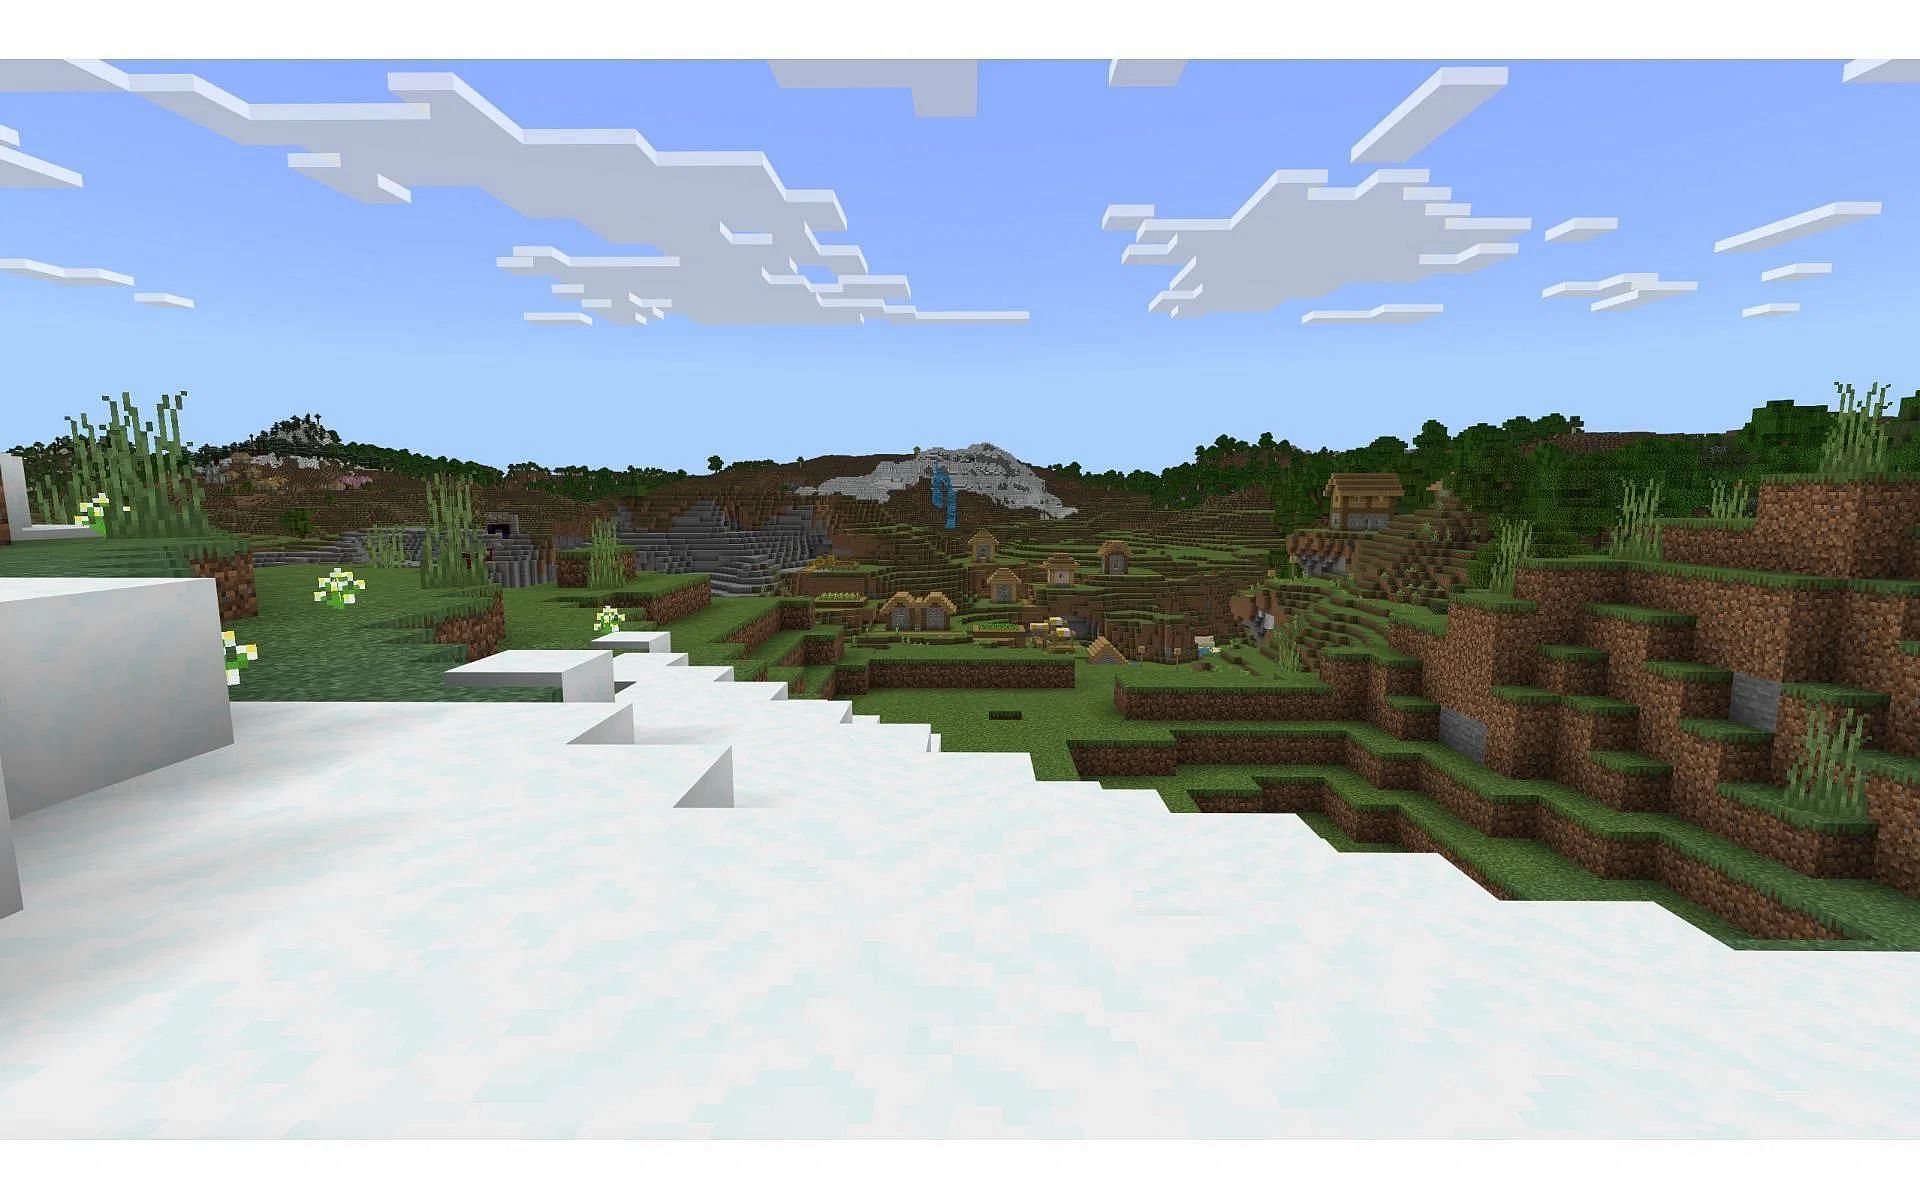 Players can find some allays to help them on their journey in this seed (Image via Mojang)